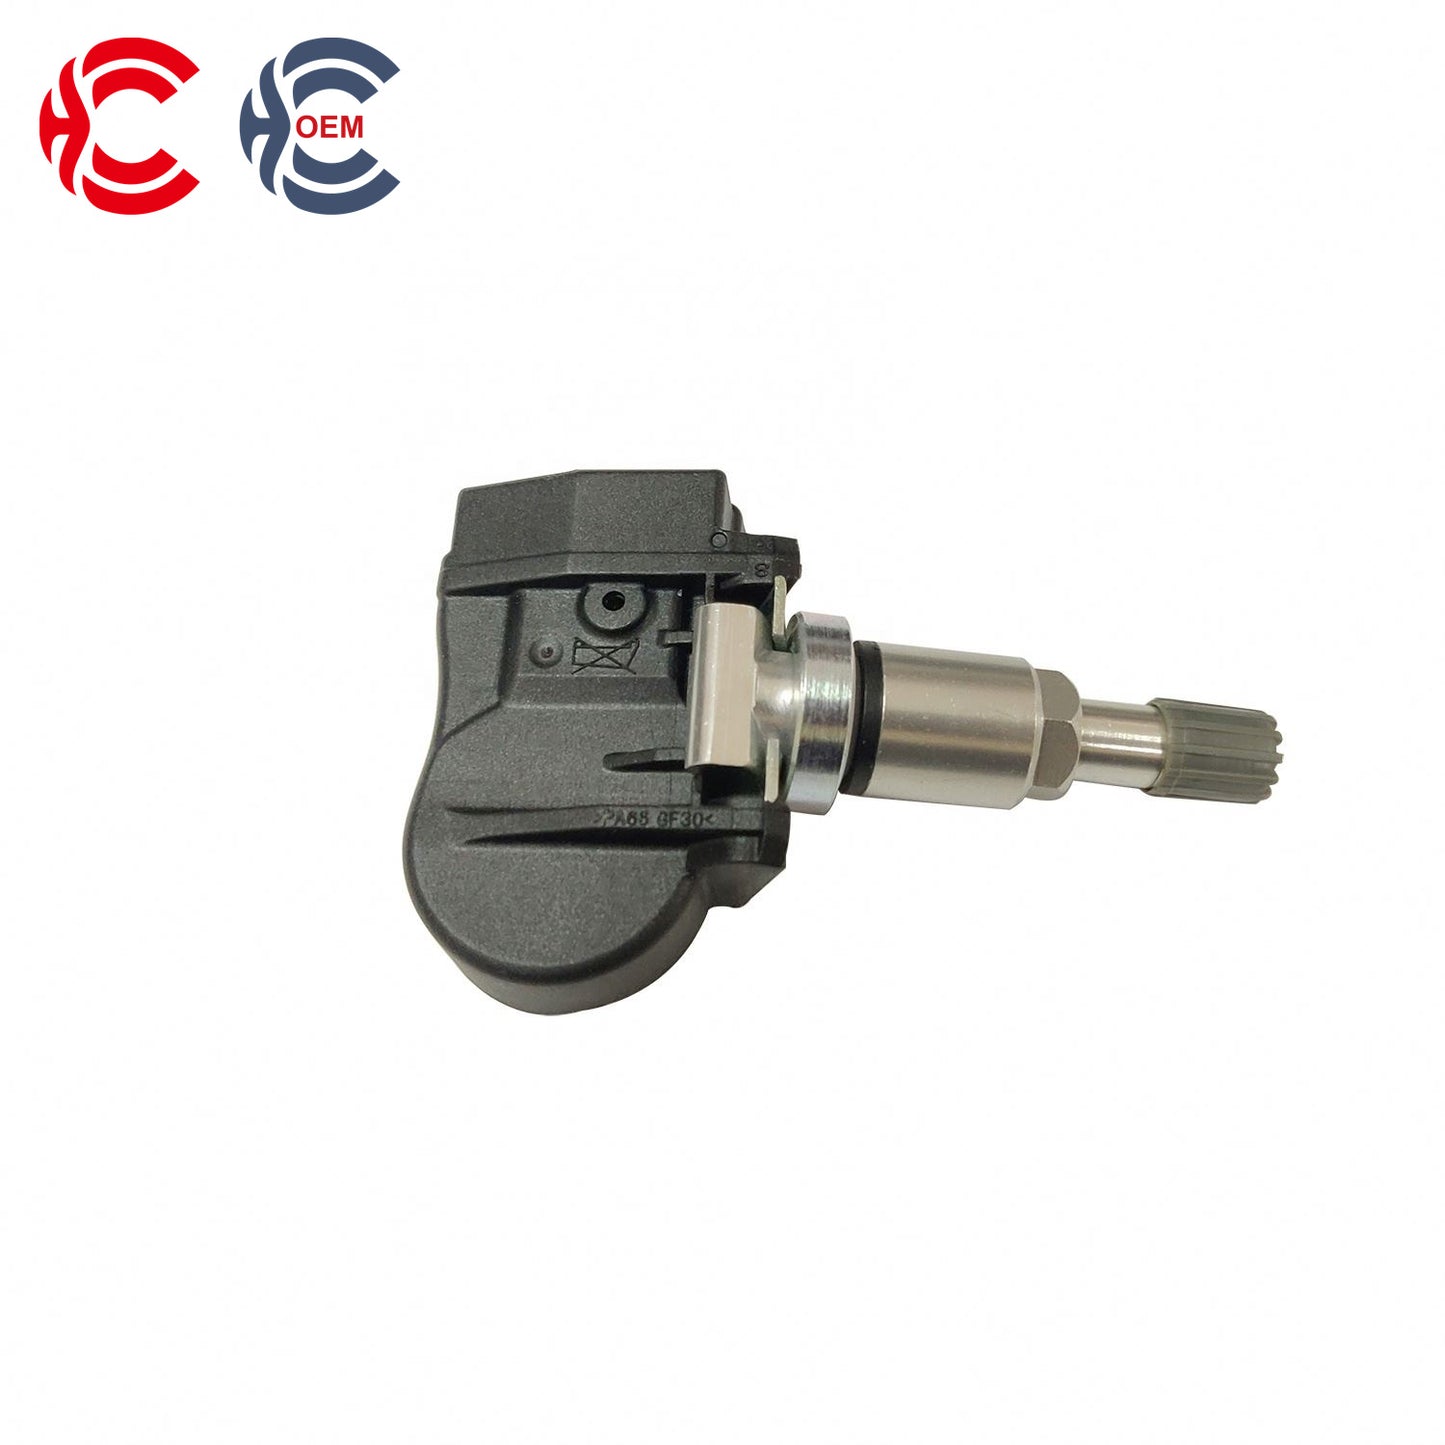 OEM: 42753-TX4-A51Material: ABS MetalColor: Black SilverOrigin: Made in ChinaWeight: 200gPacking List: 1* Tire Pressure Monitoring System TPMS Sensor More ServiceWe can provide OEM Manufacturing serviceWe can Be your one-step solution for Auto PartsWe can provide technical scheme for you Feel Free to Contact Us, We will get back to you as soon as possible.